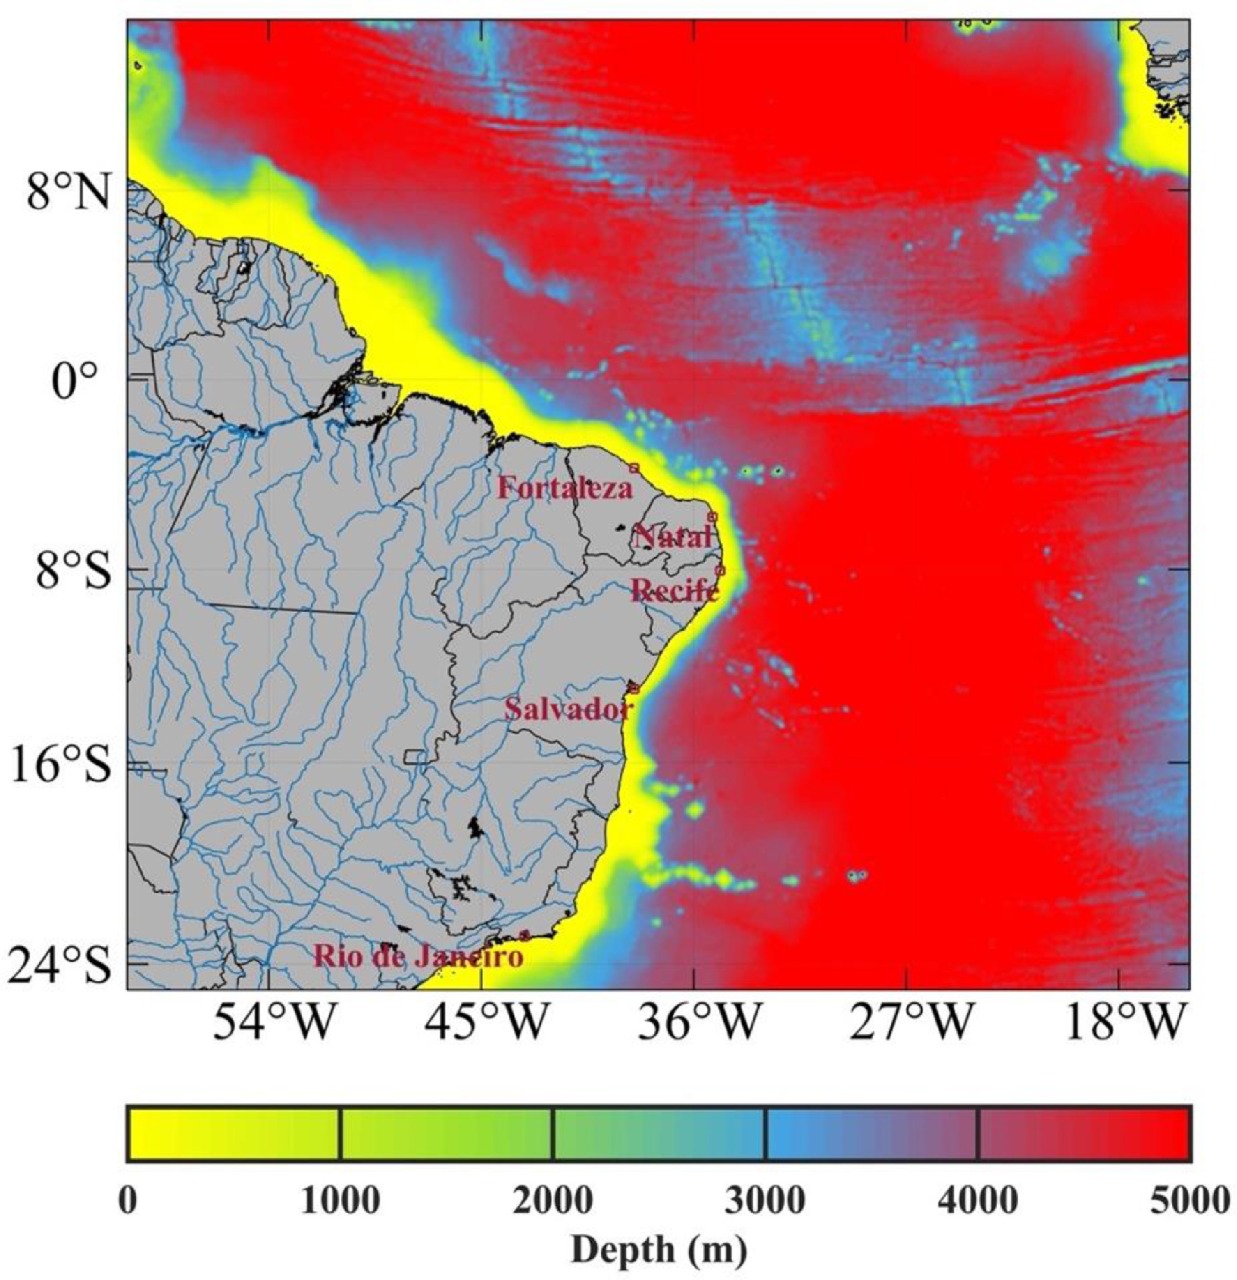 High-resolution hydrodynamics and TS structure database of the Brazilian continental shelf and adjacent waters